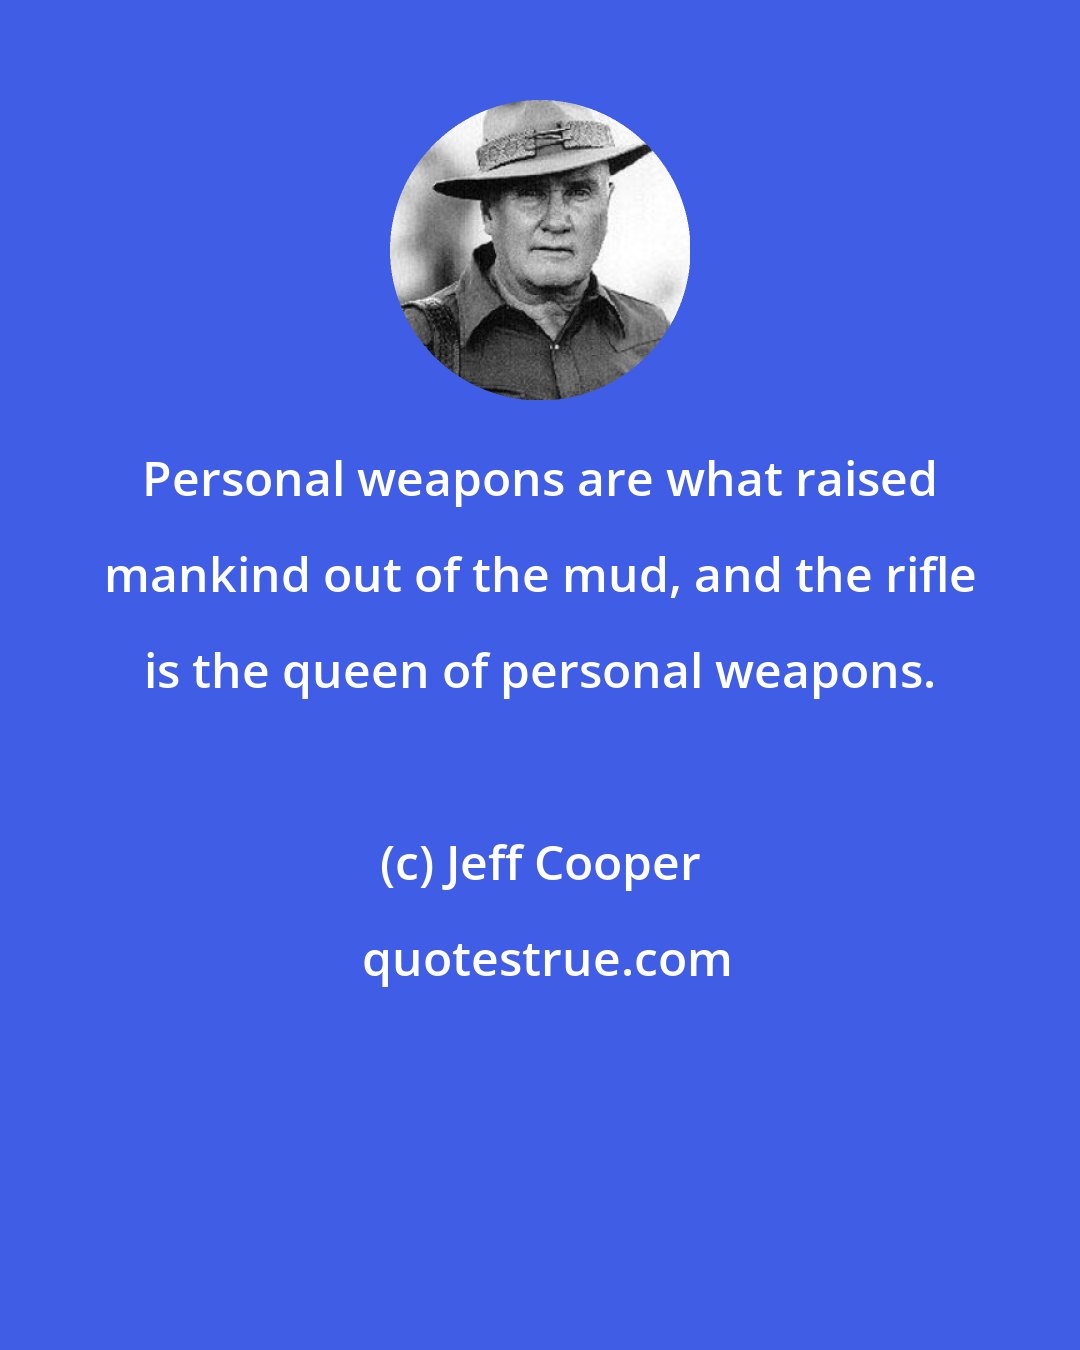 Jeff Cooper: Personal weapons are what raised mankind out of the mud, and the rifle is the queen of personal weapons.